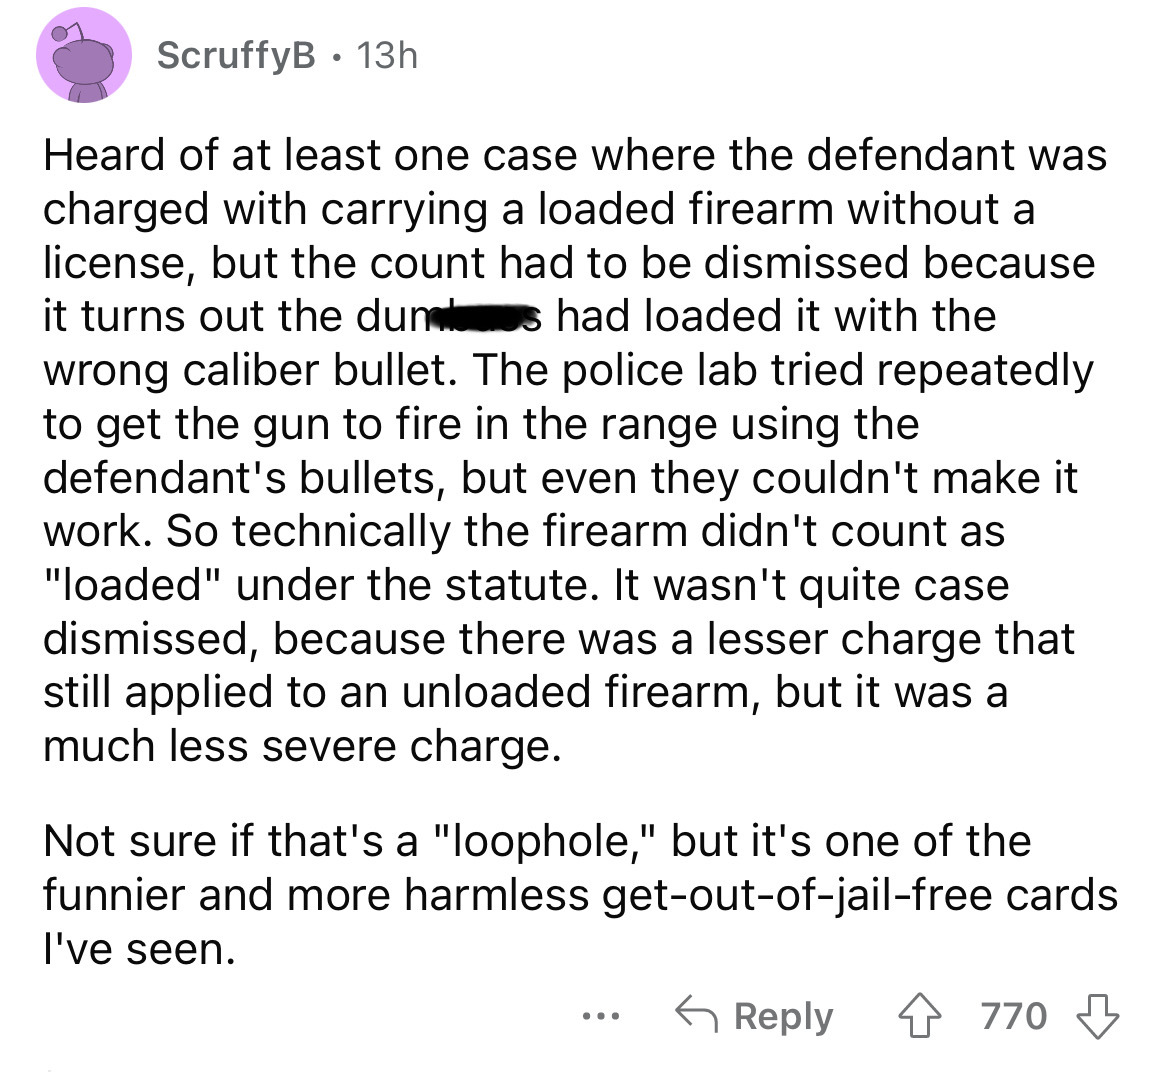 number - ScruffyB 13h Heard of at least one case where the defendant was charged with carrying a loaded firearm without a license, but the count had to be dismissed because it turns out the dunes had loaded it with the wrong caliber bullet. The police lab